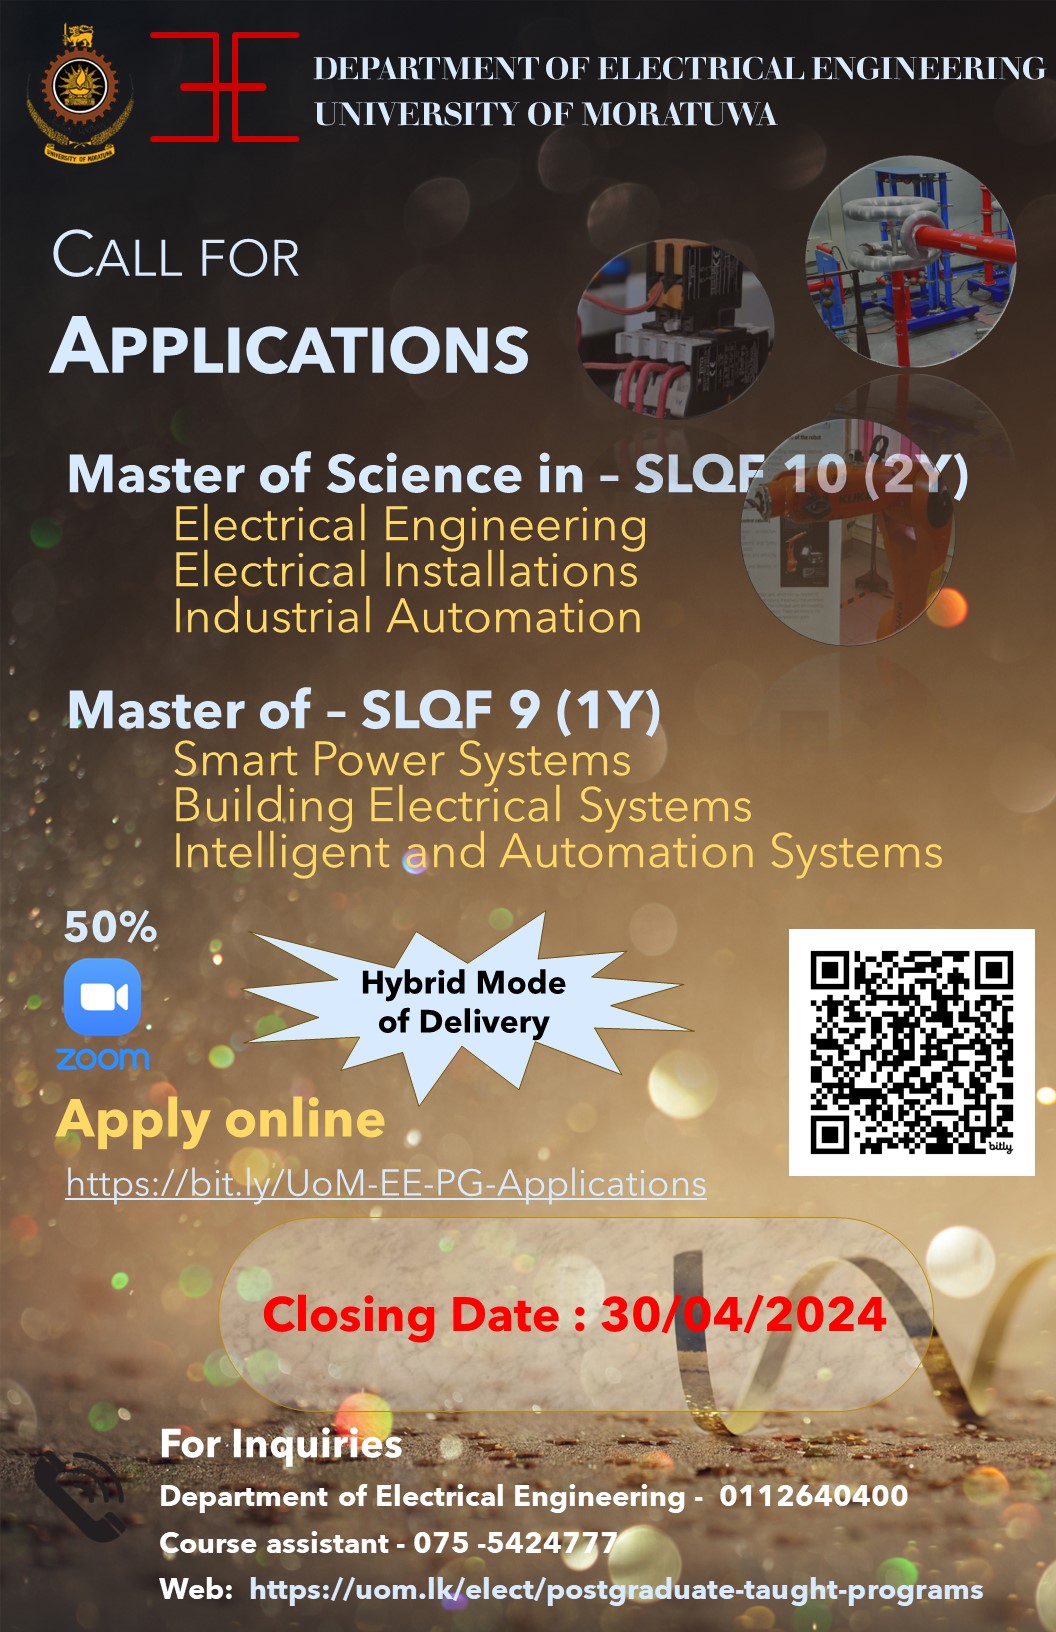 Master of Science in Electrical Engineering, Electrical Installations, and Industrial Automation (SLQF – L10, 2 years)